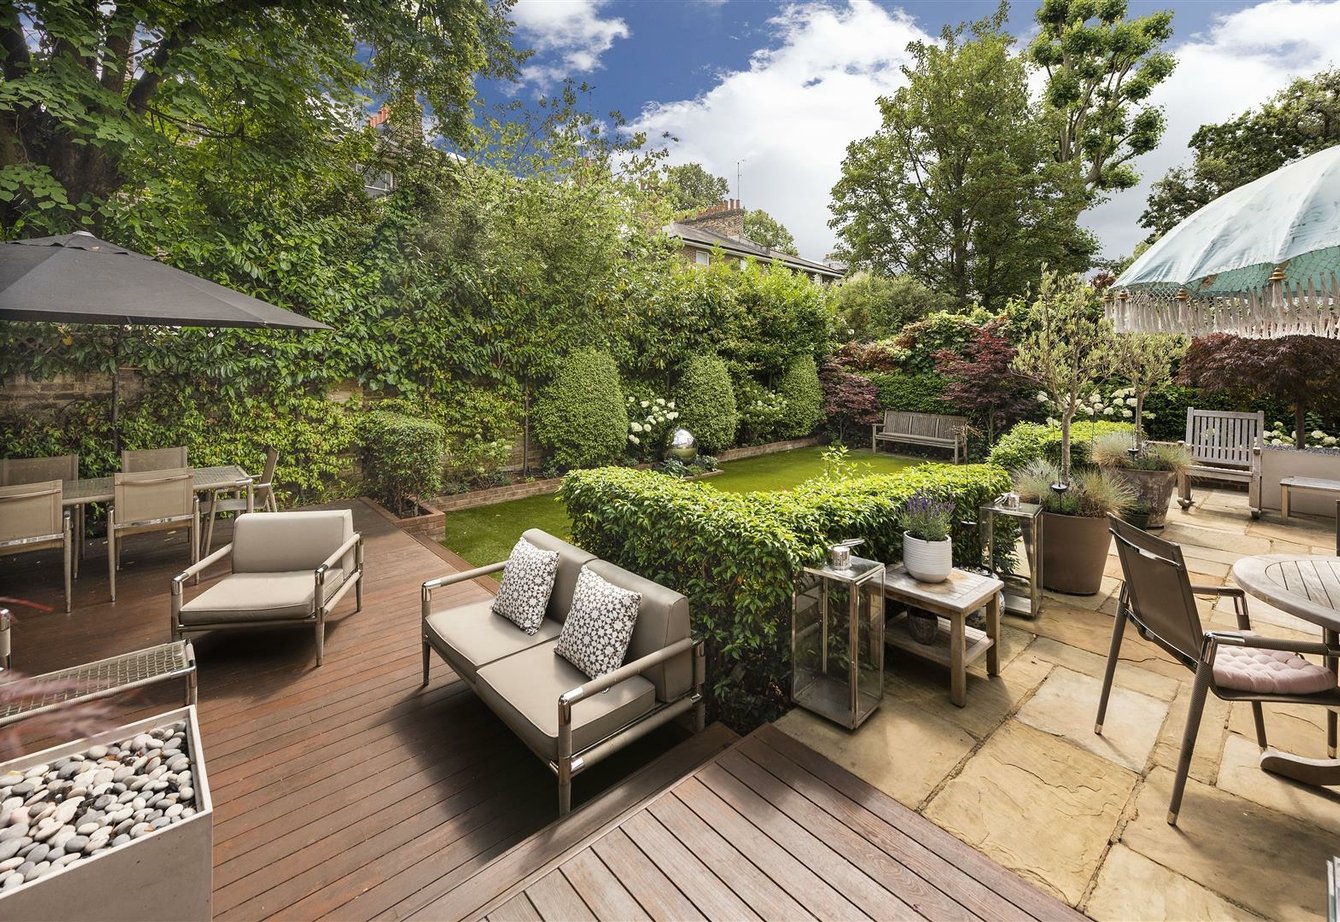 for-sale-springfield-road-london-394-view16